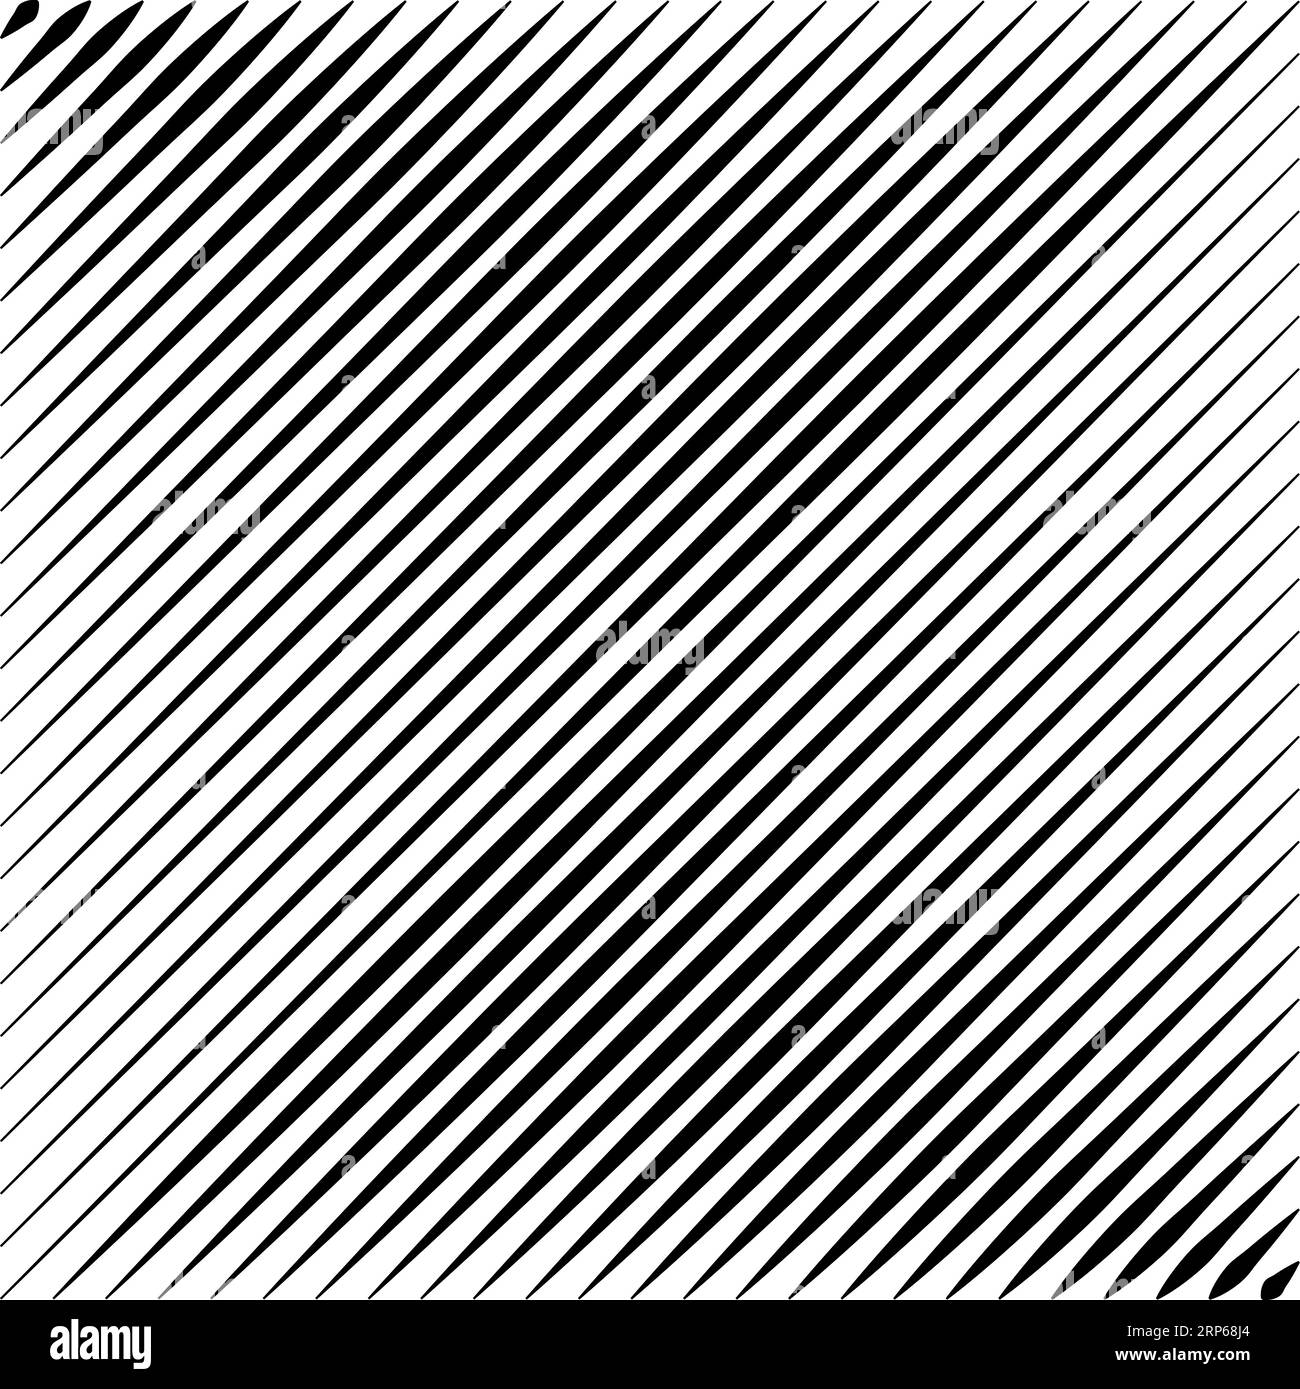 Diagonal line drawings speed lines stripes Vector Image